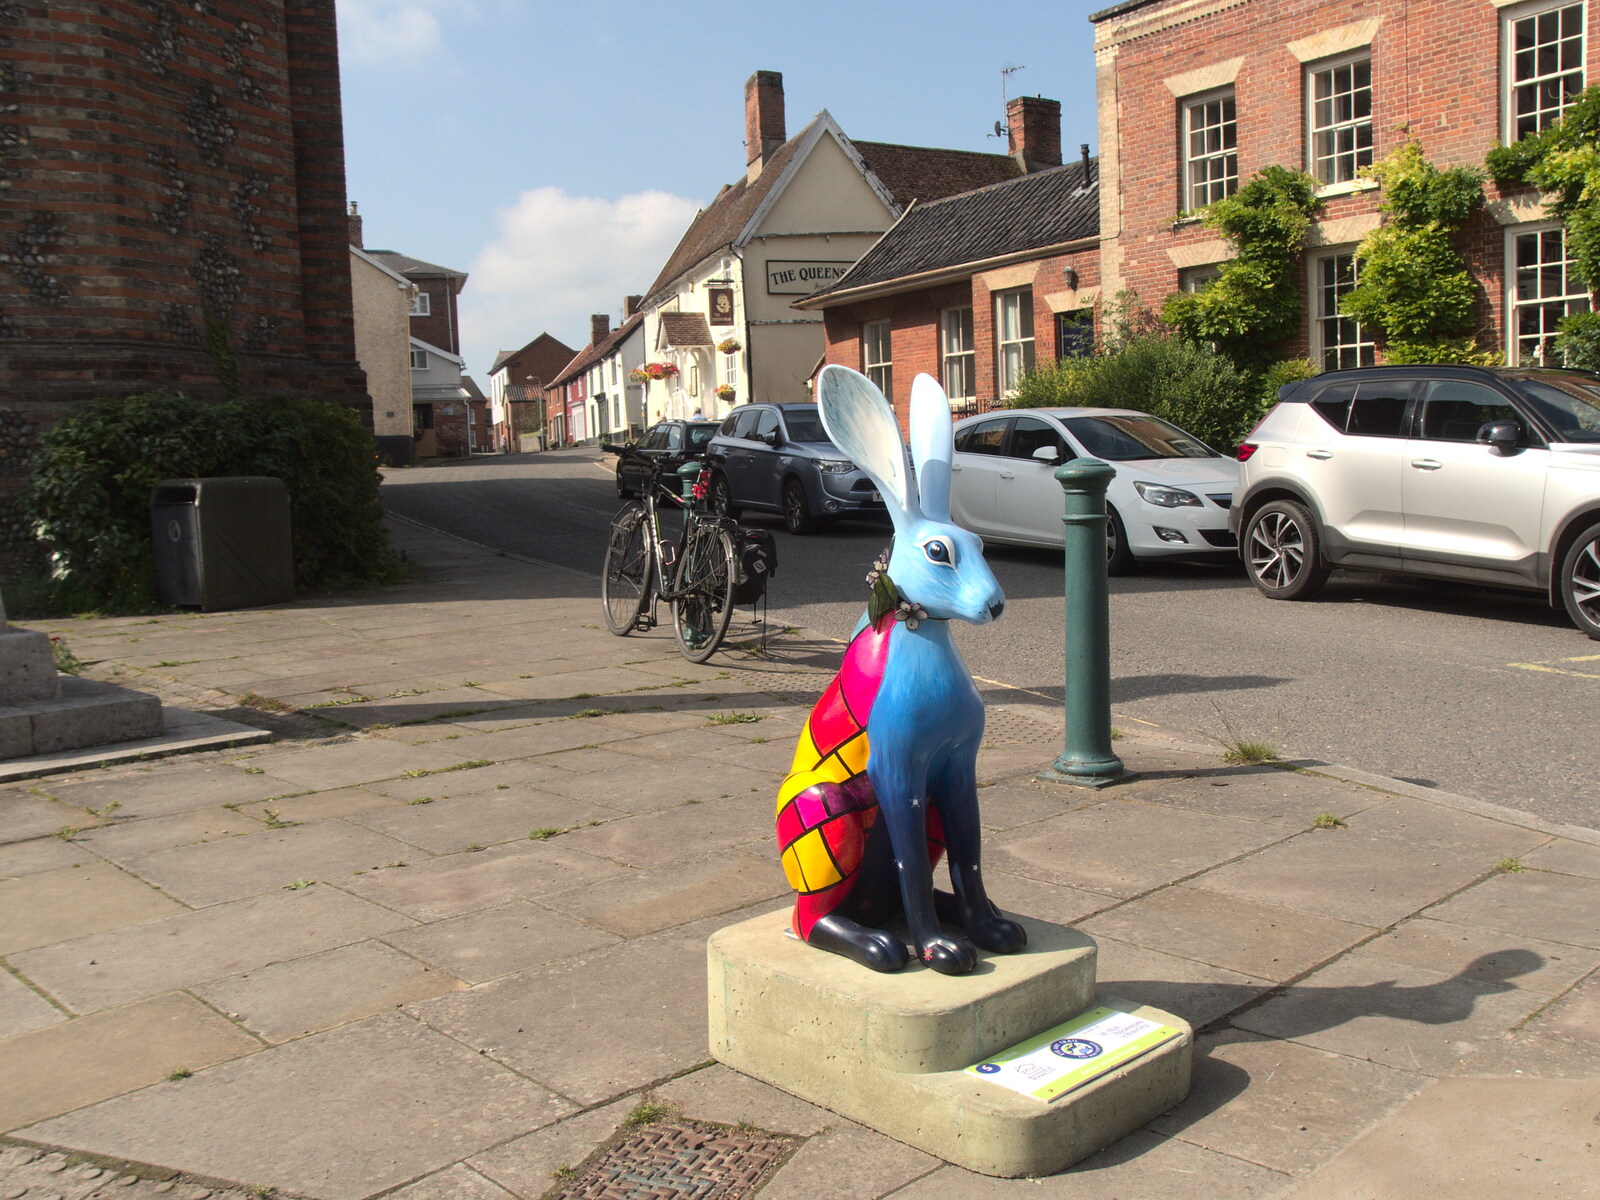 Nosher's bike and the Lambseth hare from Hares, Tortoises and Station 119, Eye, Suffolk - 19th July 2021